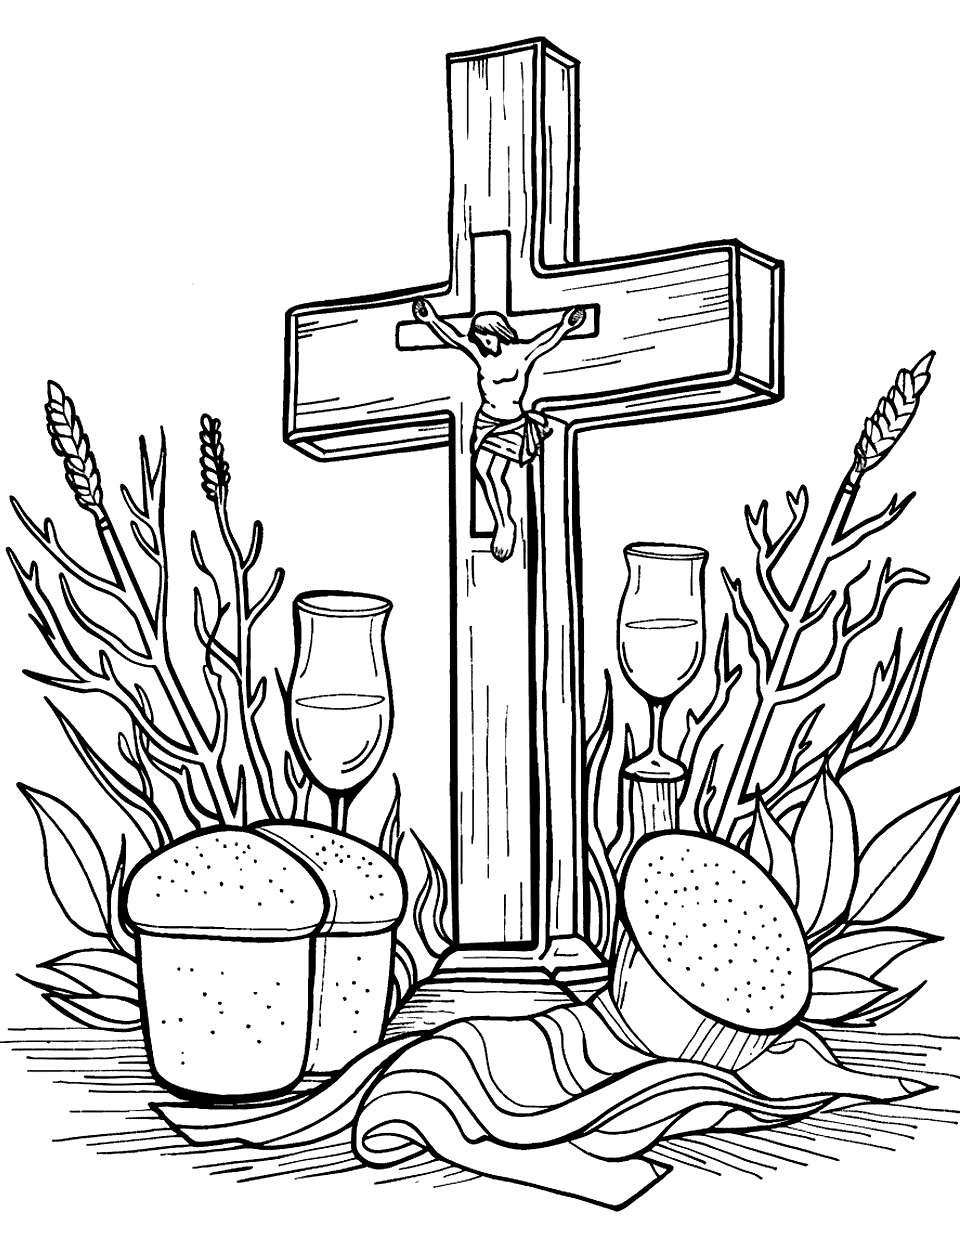 First Communion Scene Cross Coloring Page - A cross next to symbols of bread and wine symbolizes the first communion.